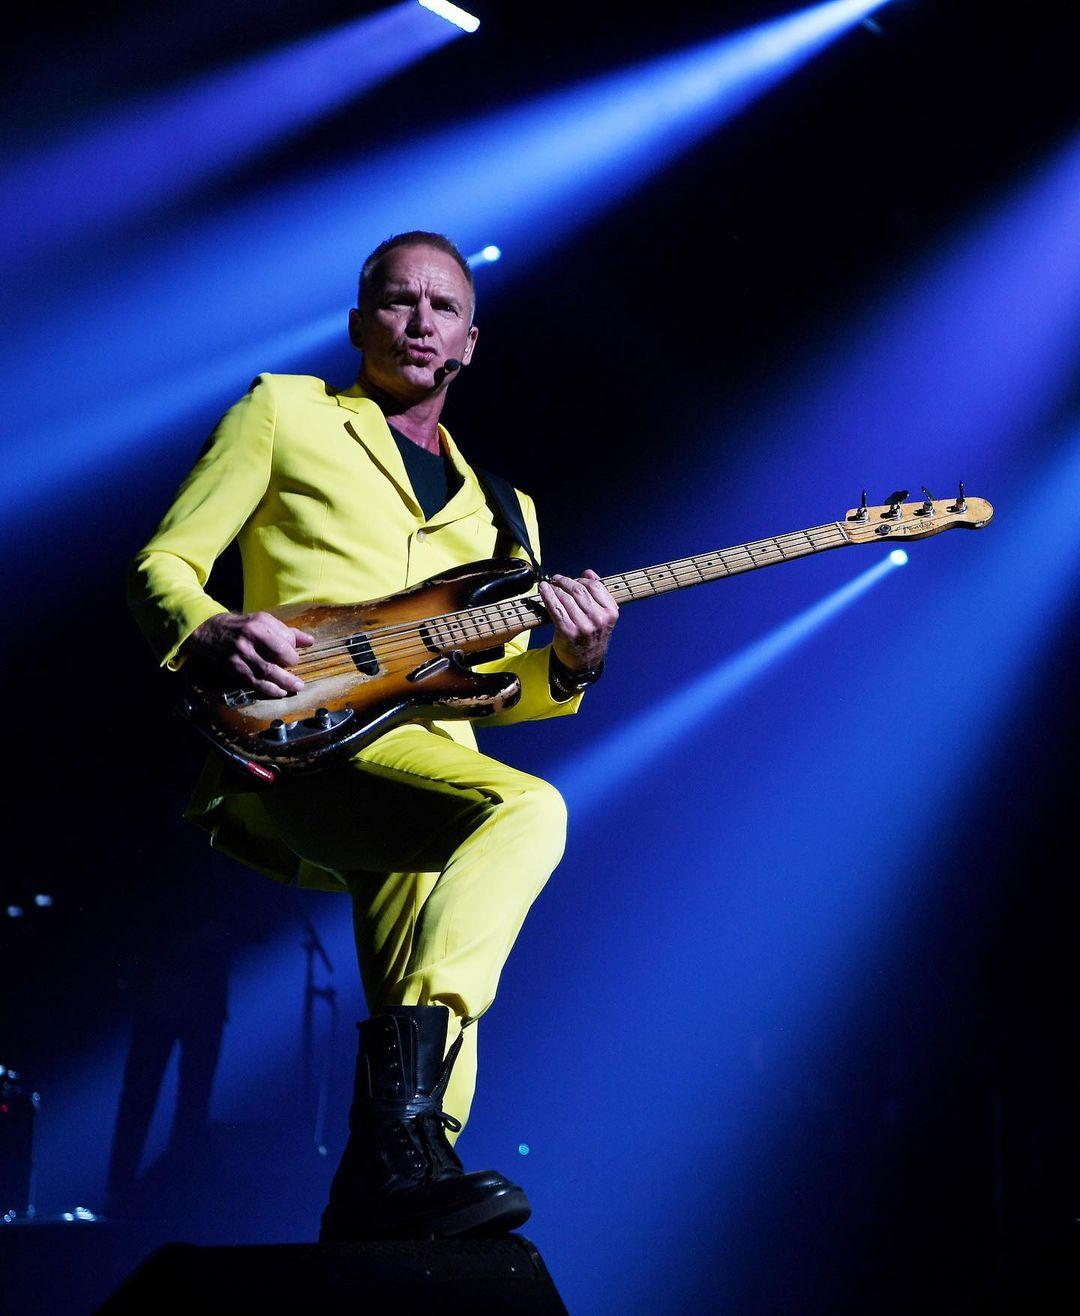 A photo showing singer, Sting, in a yellow suit and pant, with a guitar on stage.